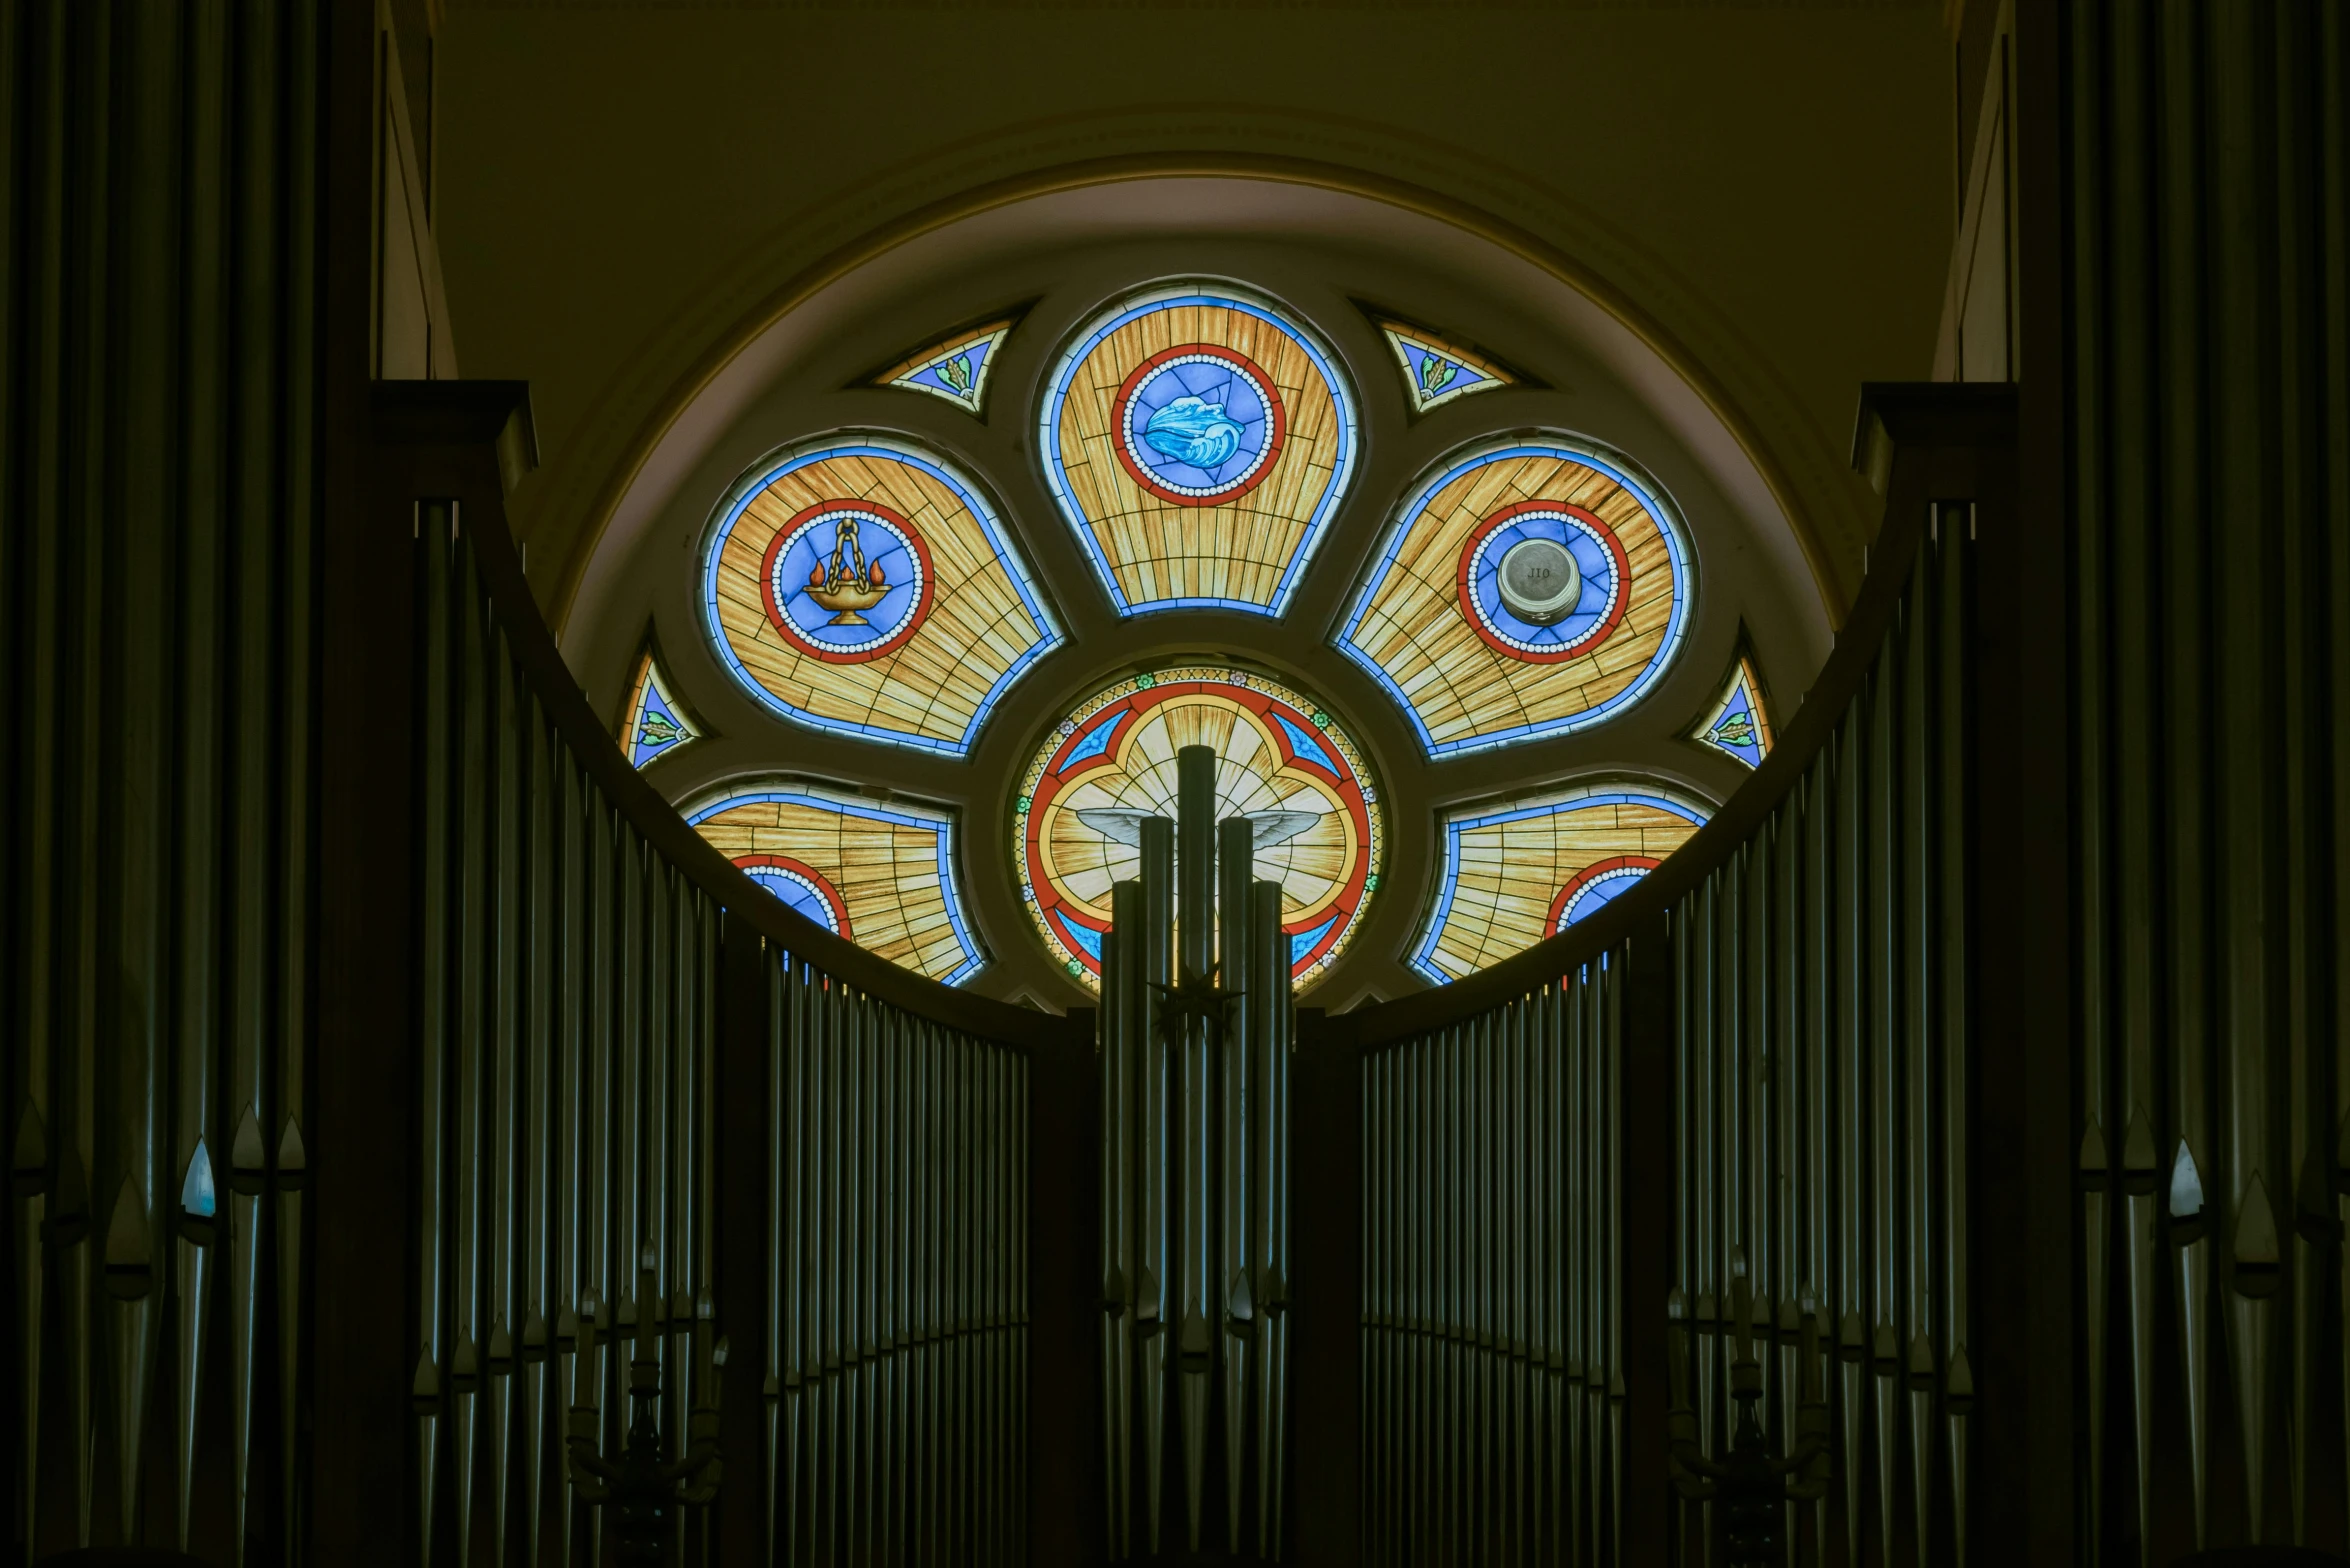 a pipe organ in front of a stained glass window, circular windows, 2019, merriam daniel, 2006 photograph